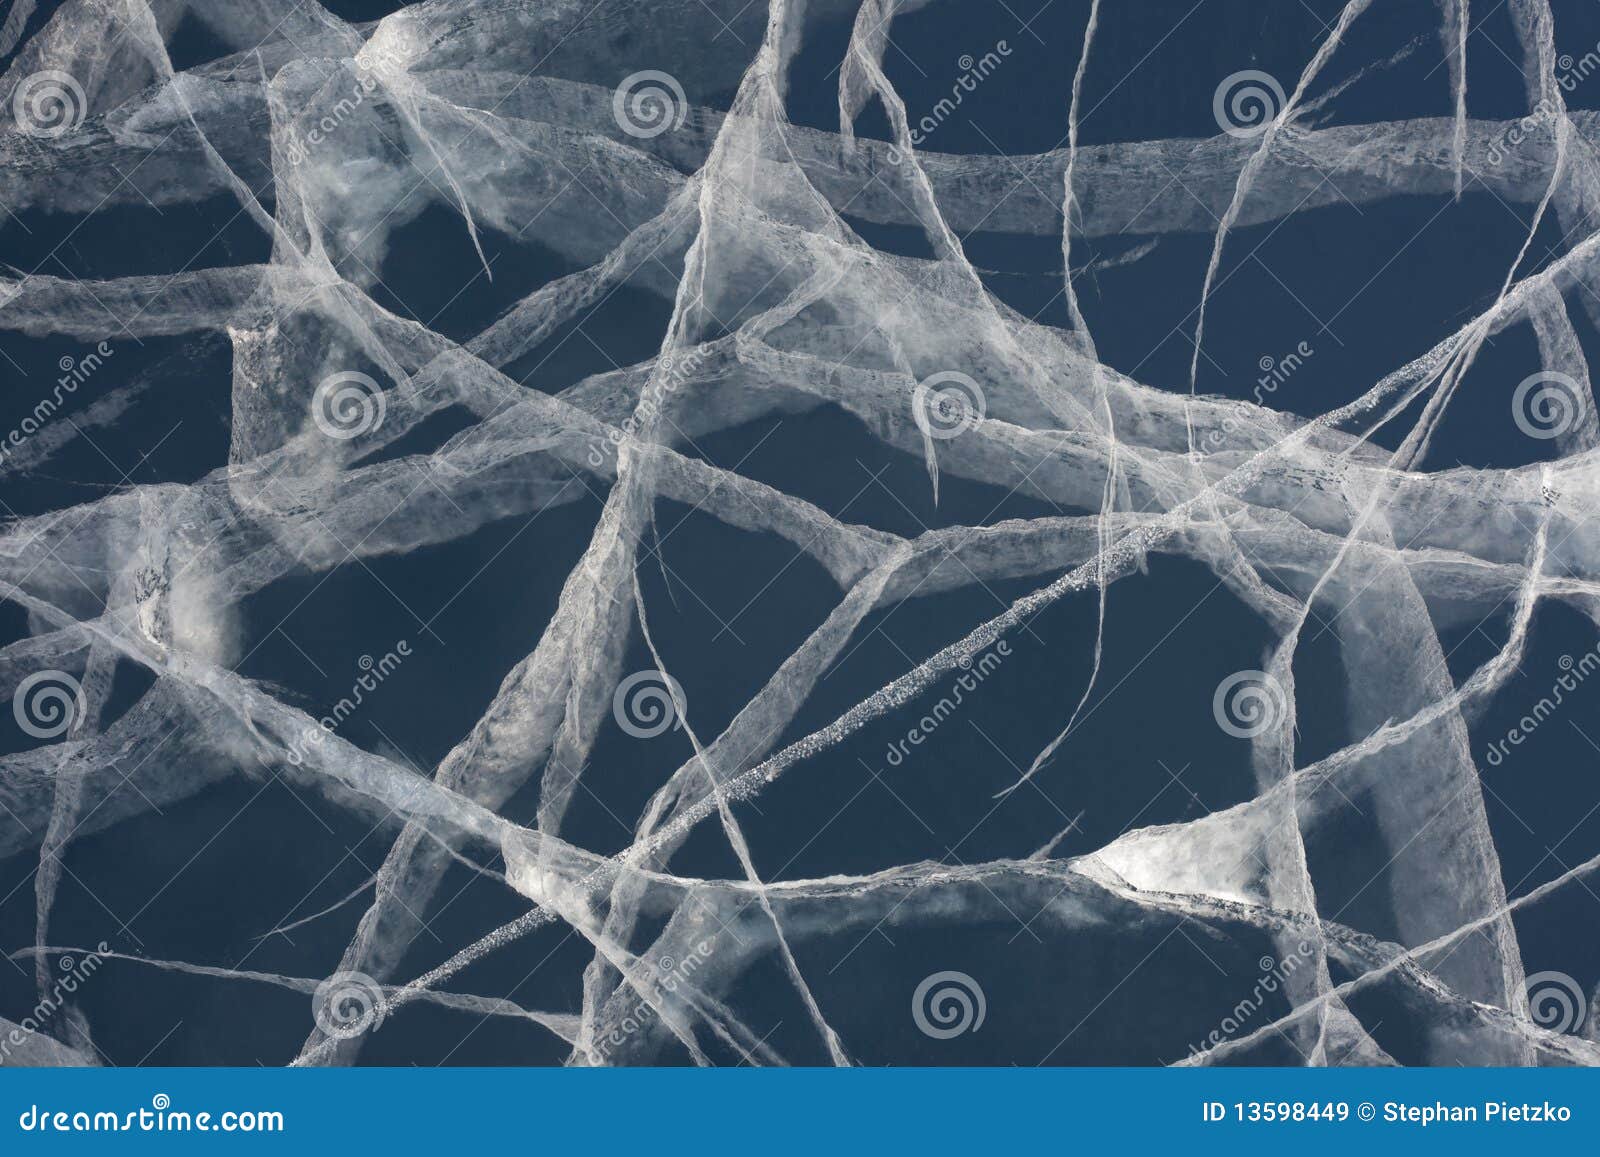 spider web of tension cracks in thick layer of ice